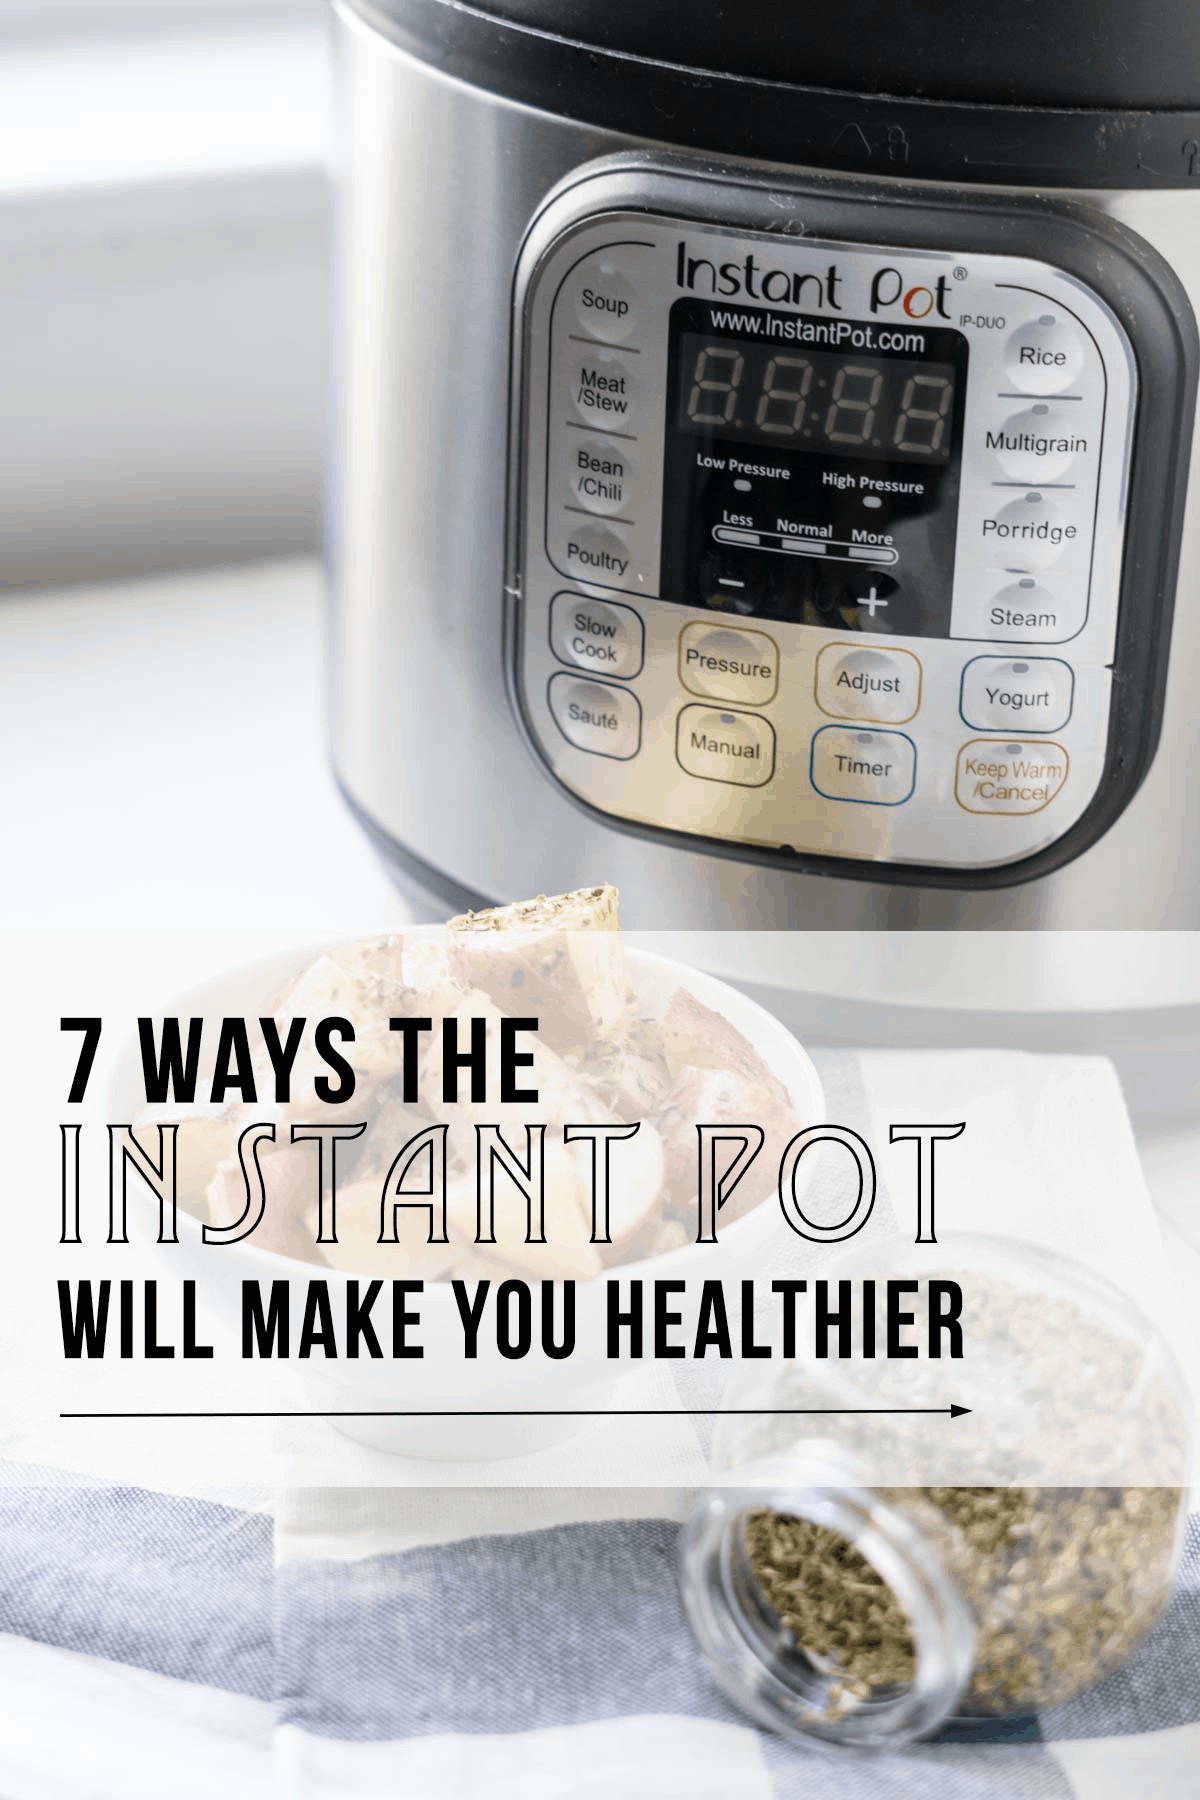 7 Ways the Instant Pot will make you Healthier